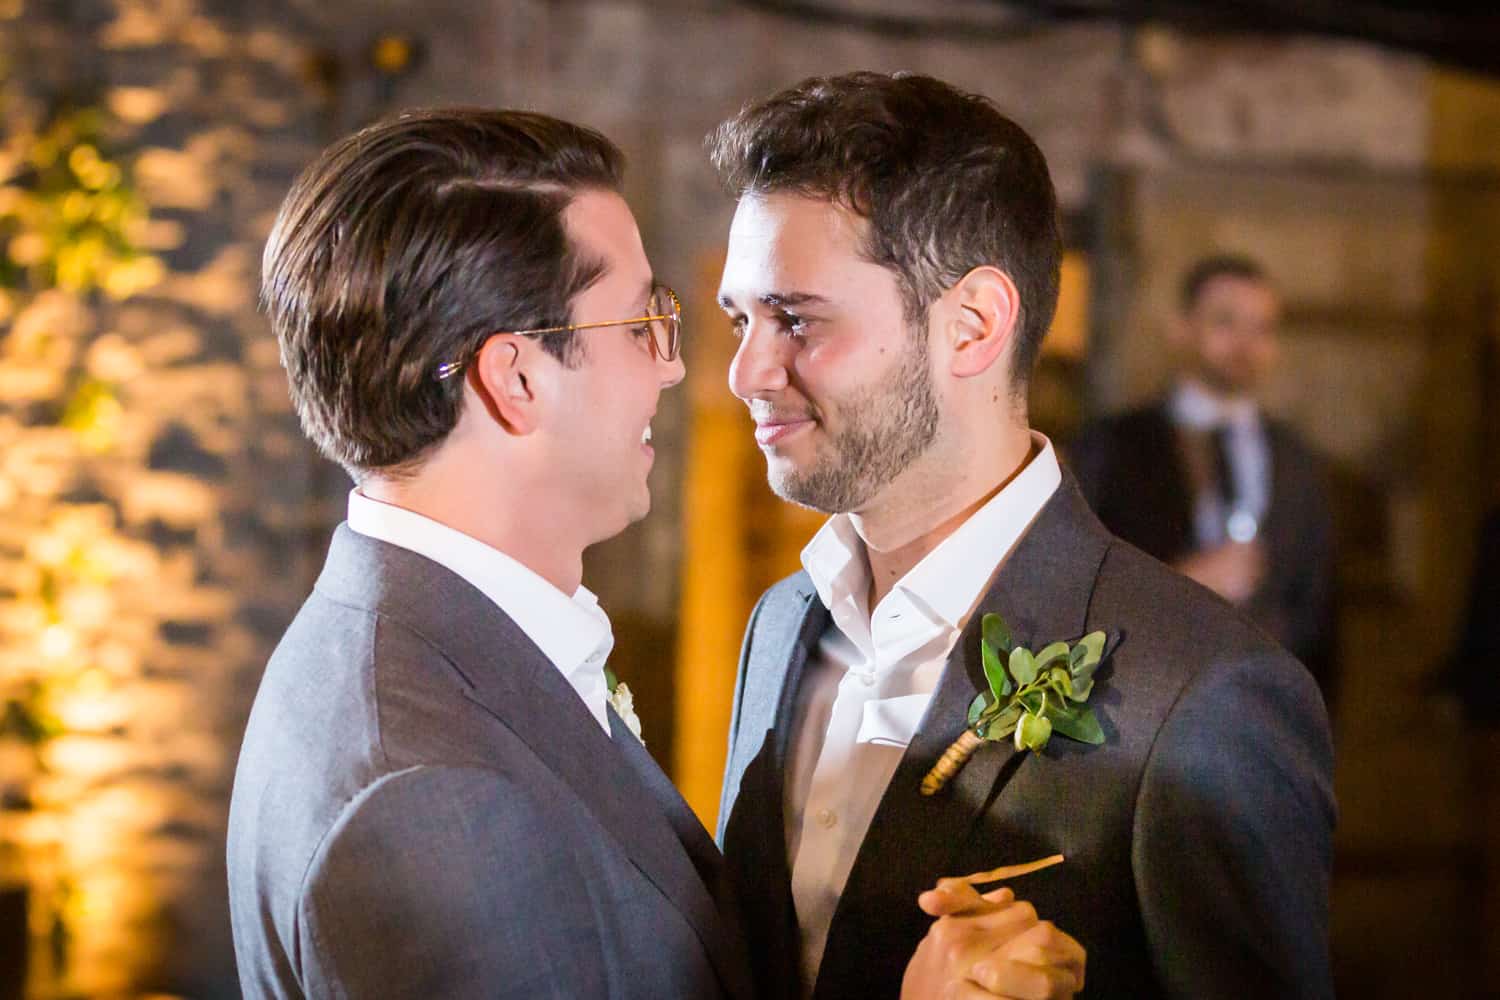 Greenpoint Loft wedding photos of two grooms during first dance